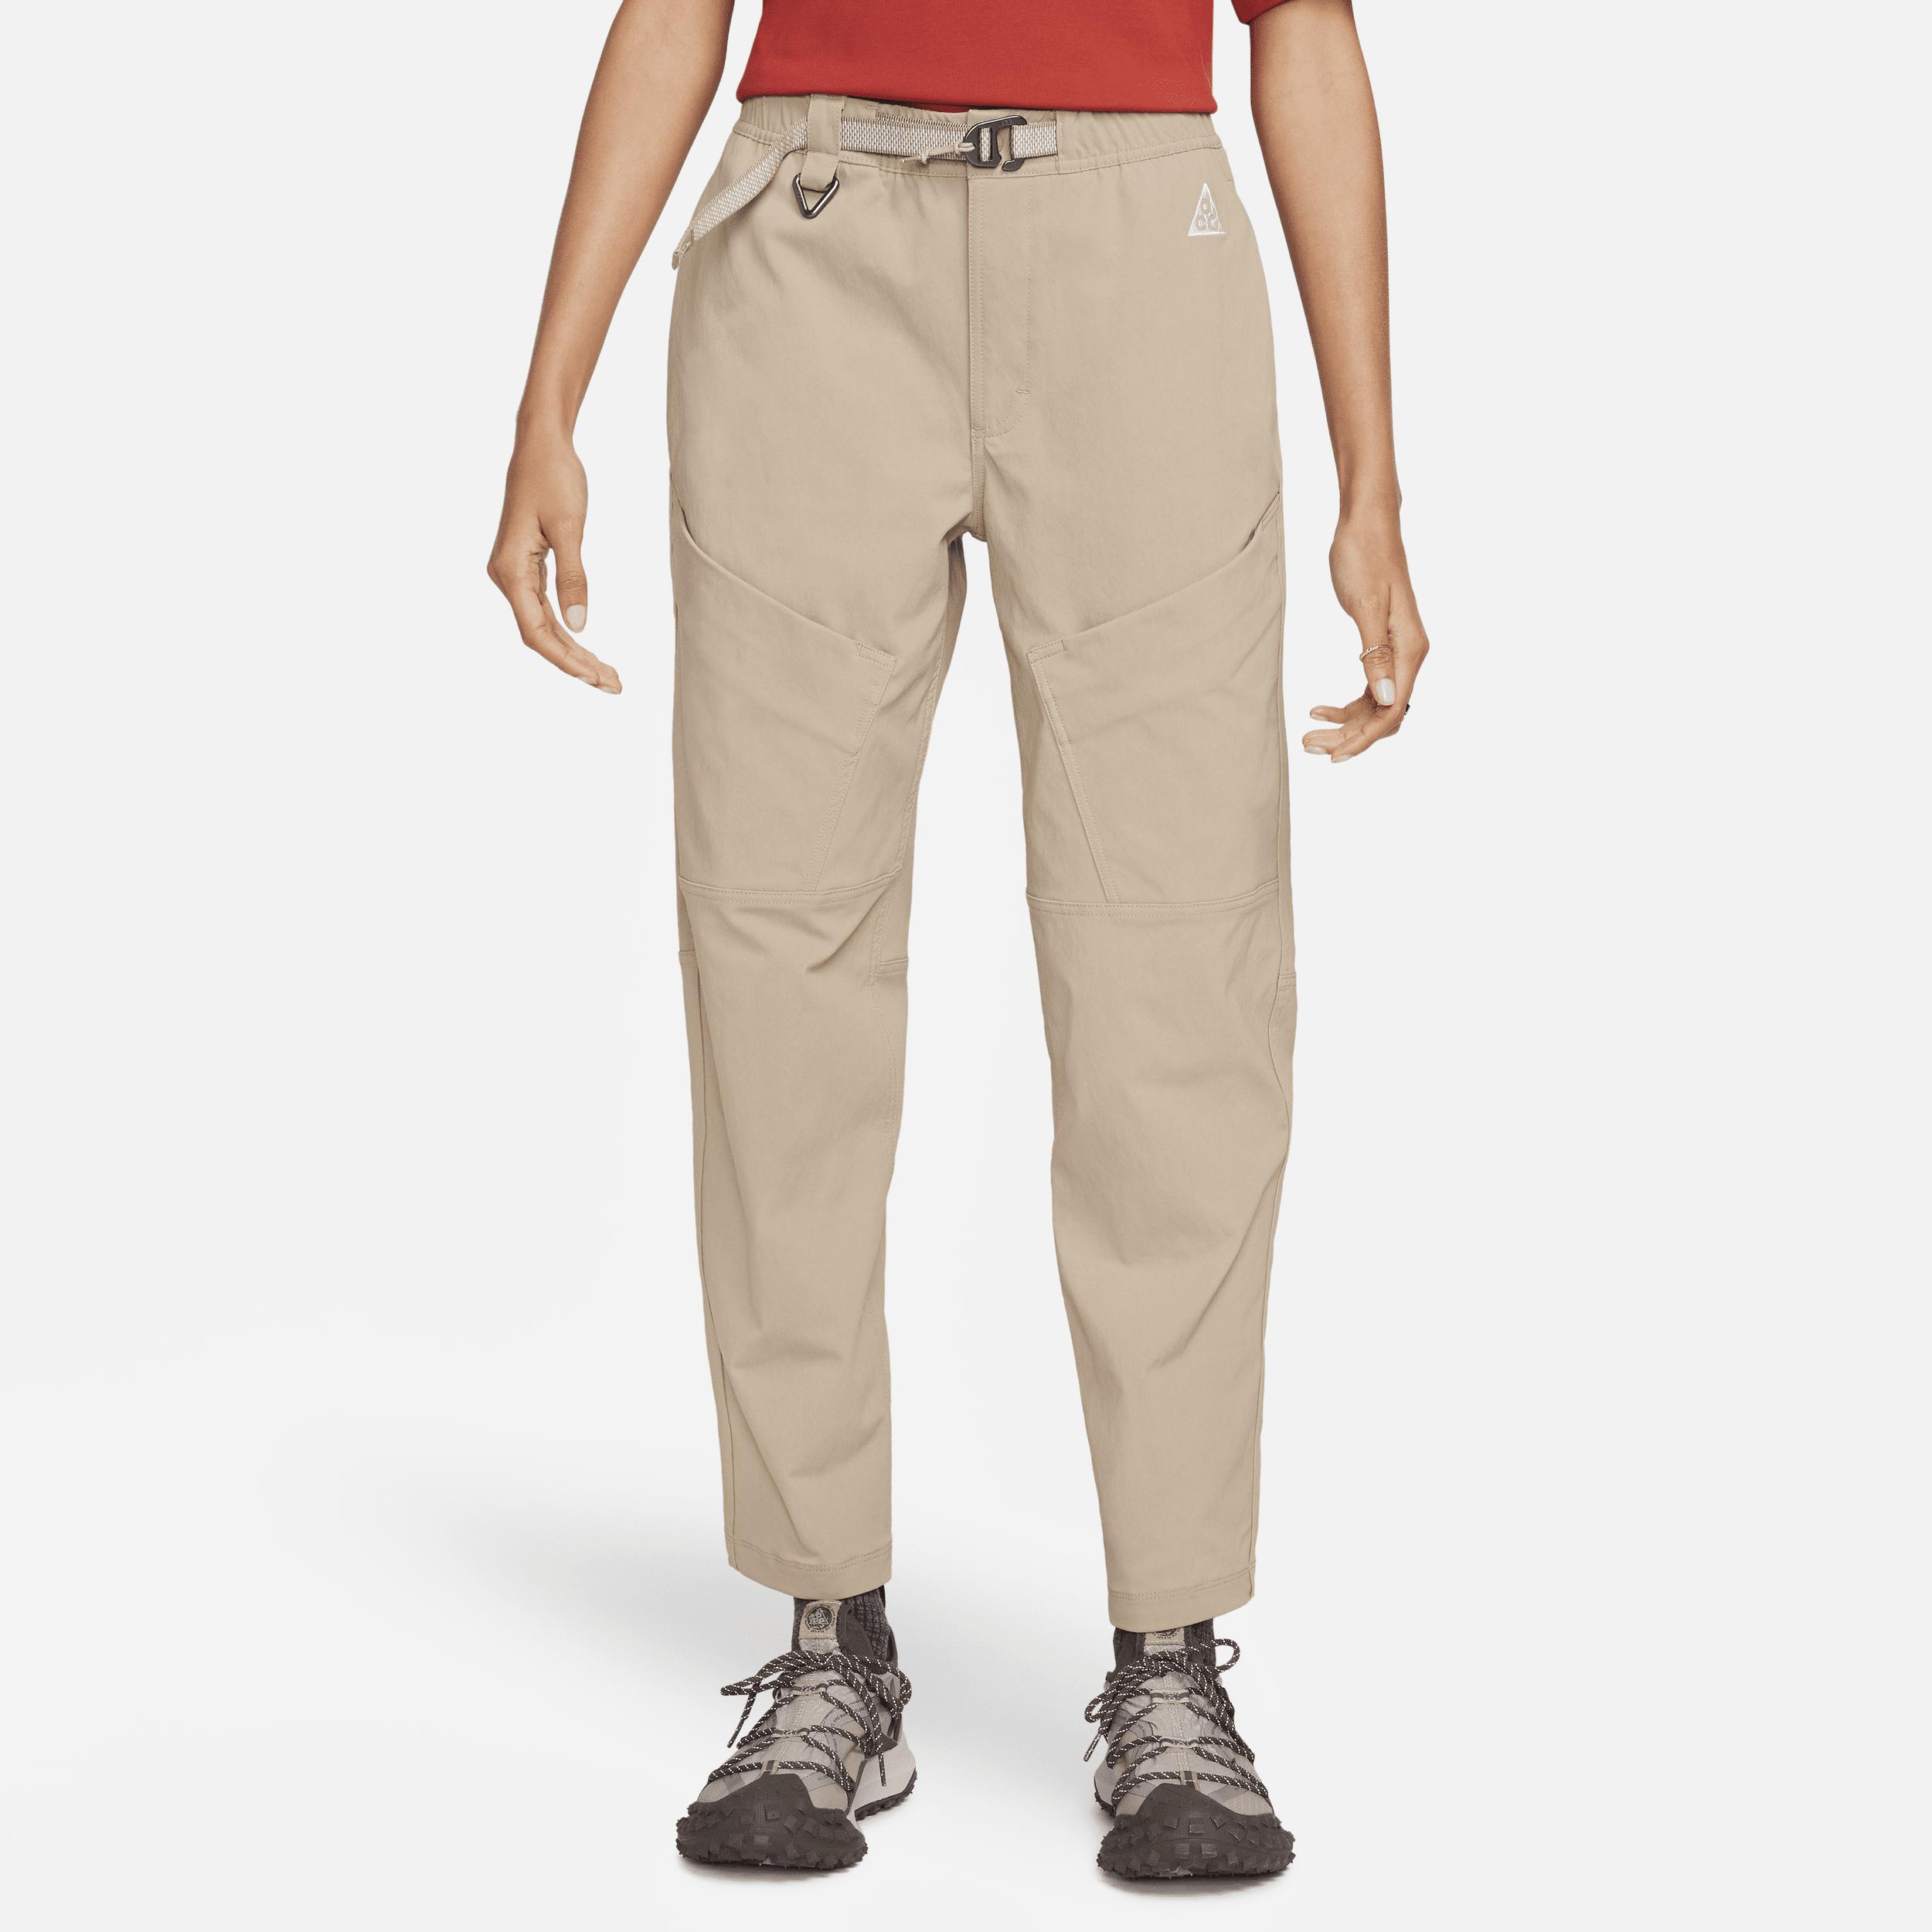 Nike Acg Mid-rise Hike Pants in Natural